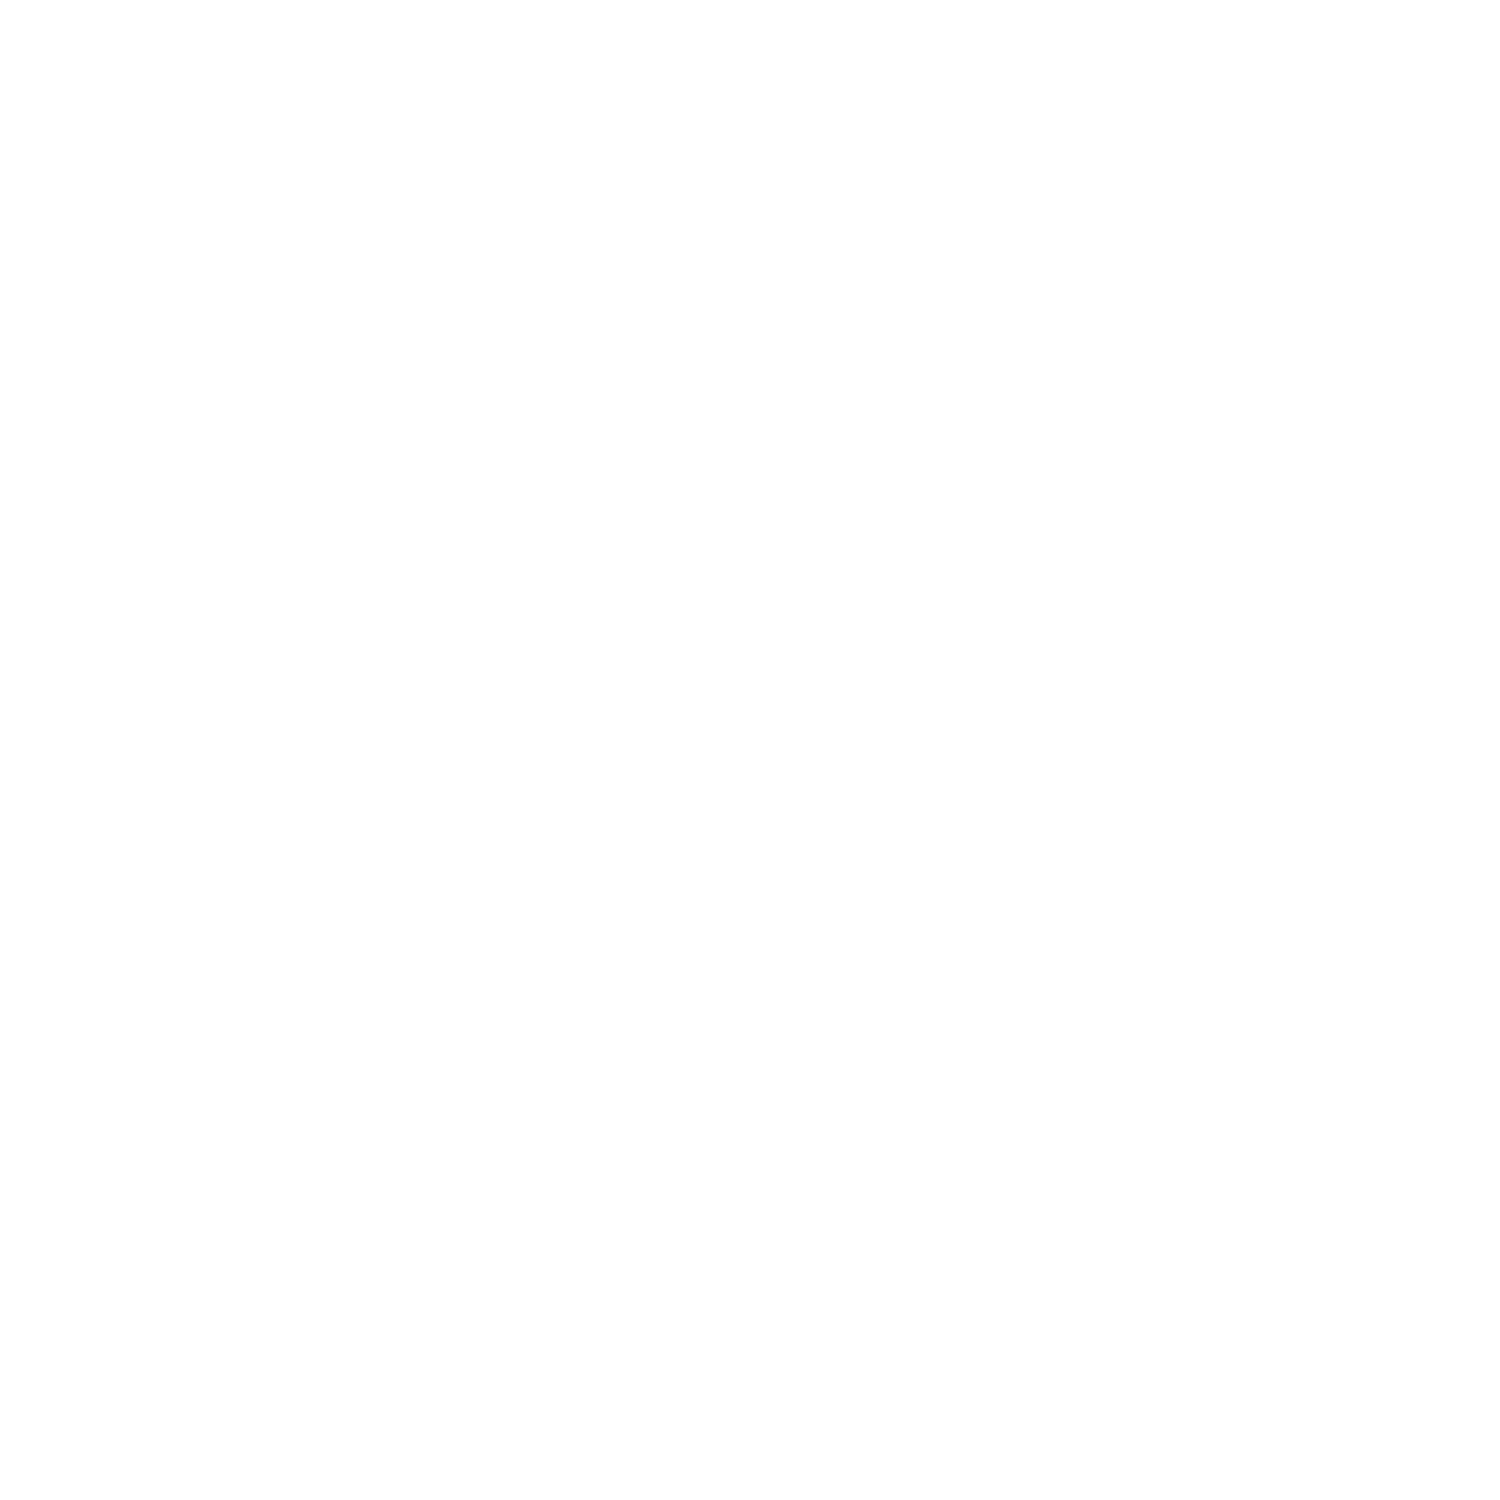 Moonstone Photography and Film